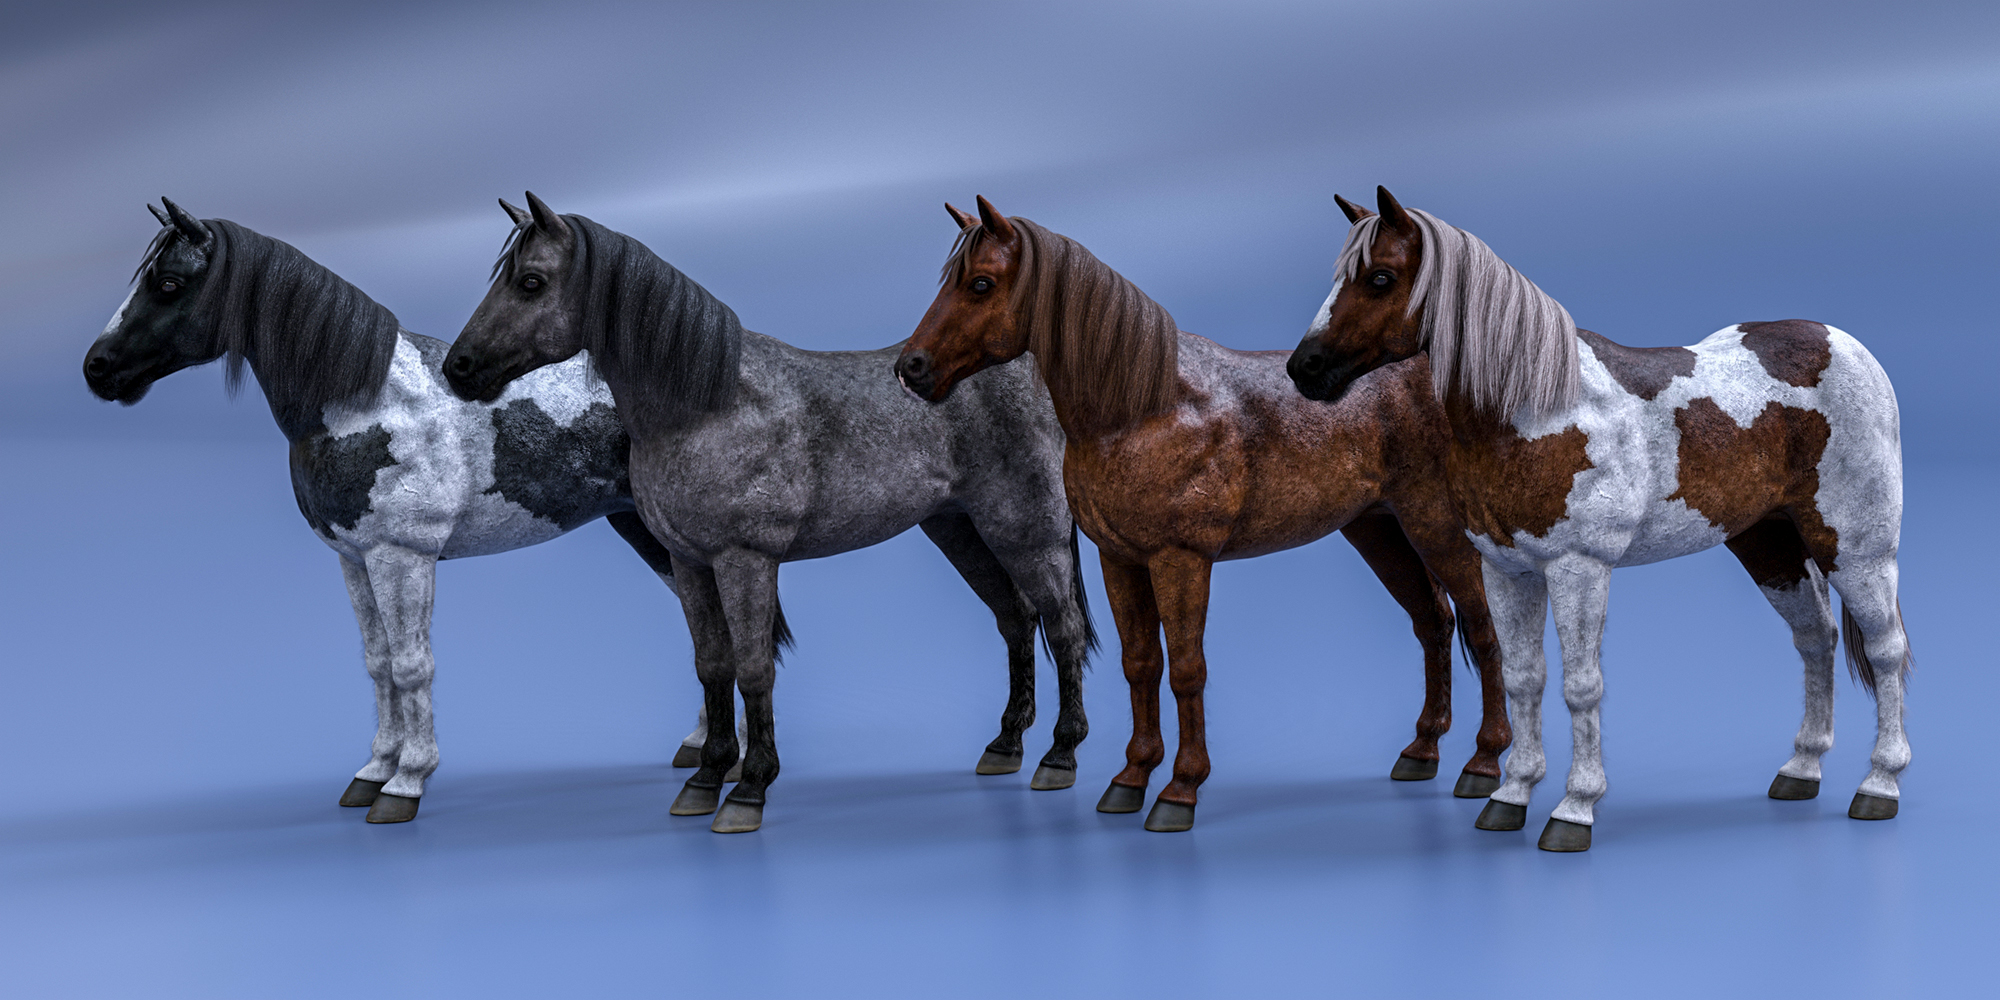 Pinto, grey and chestnut horses